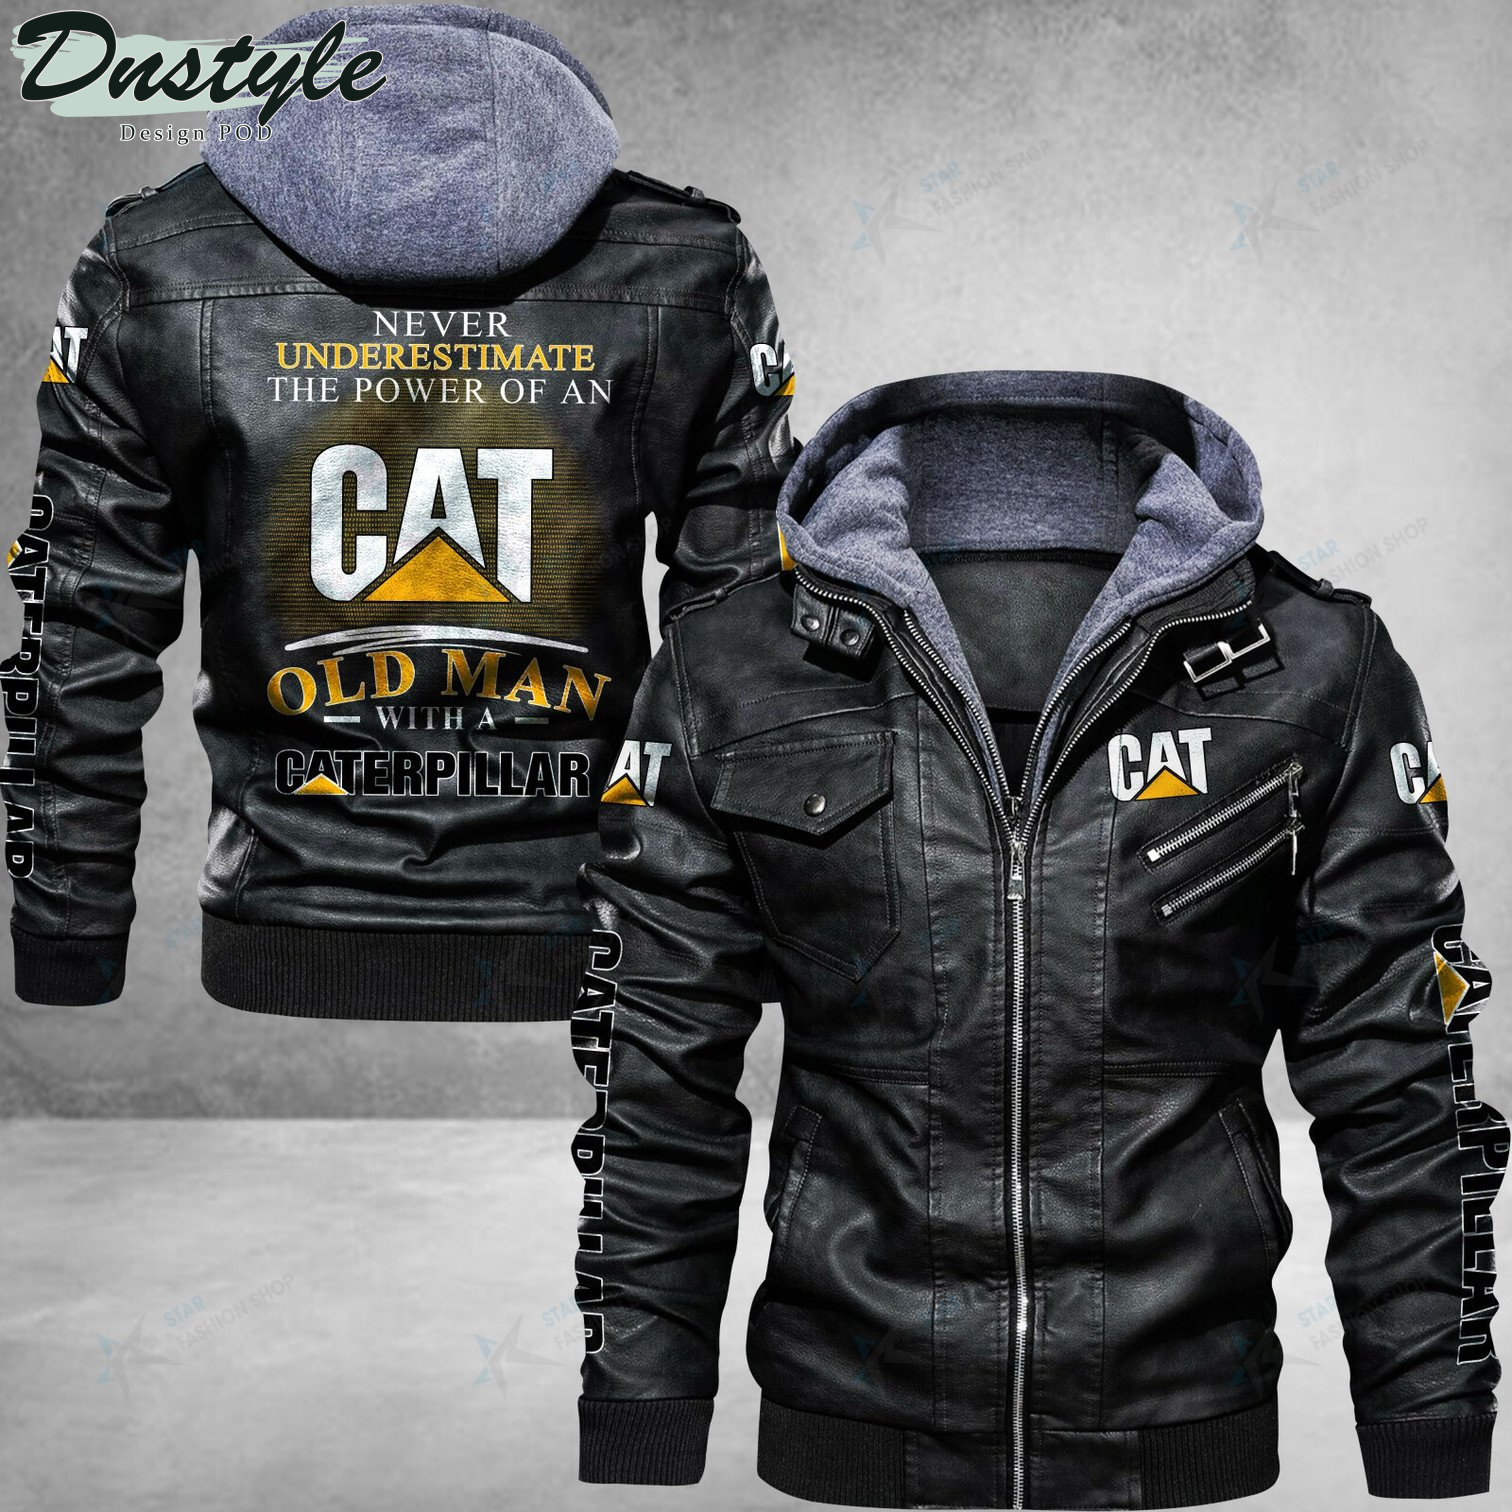 Caterpillar Inc never underestimate the power of an old man leather jacket